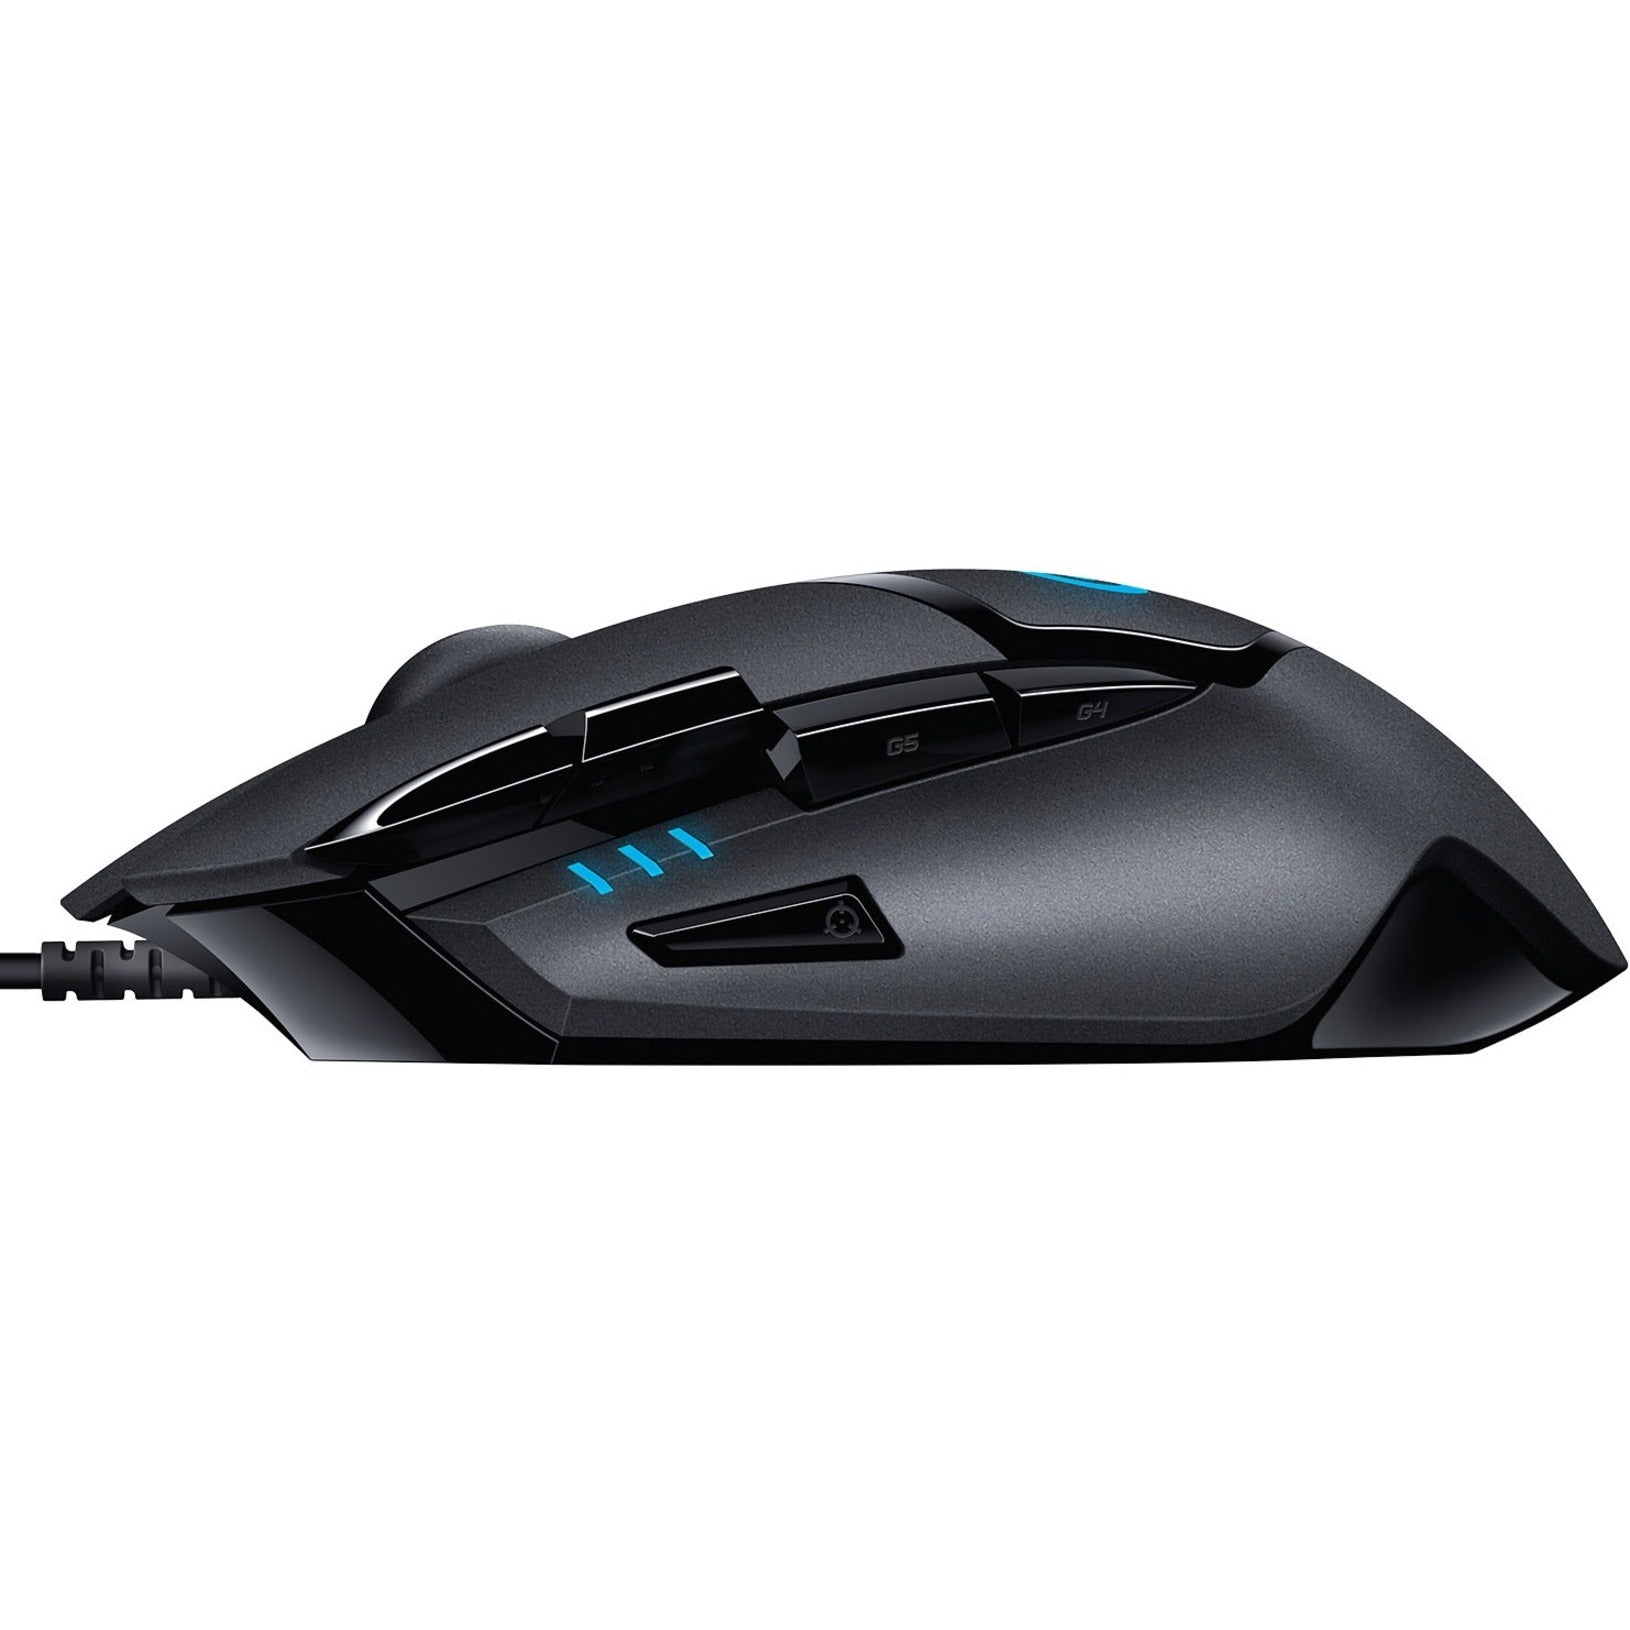 Logitech 910-004069 G402 Hyperion Fury Ultra-Fast FPS Gaming Mouse, Lightweight with 4000 dpi Resolution